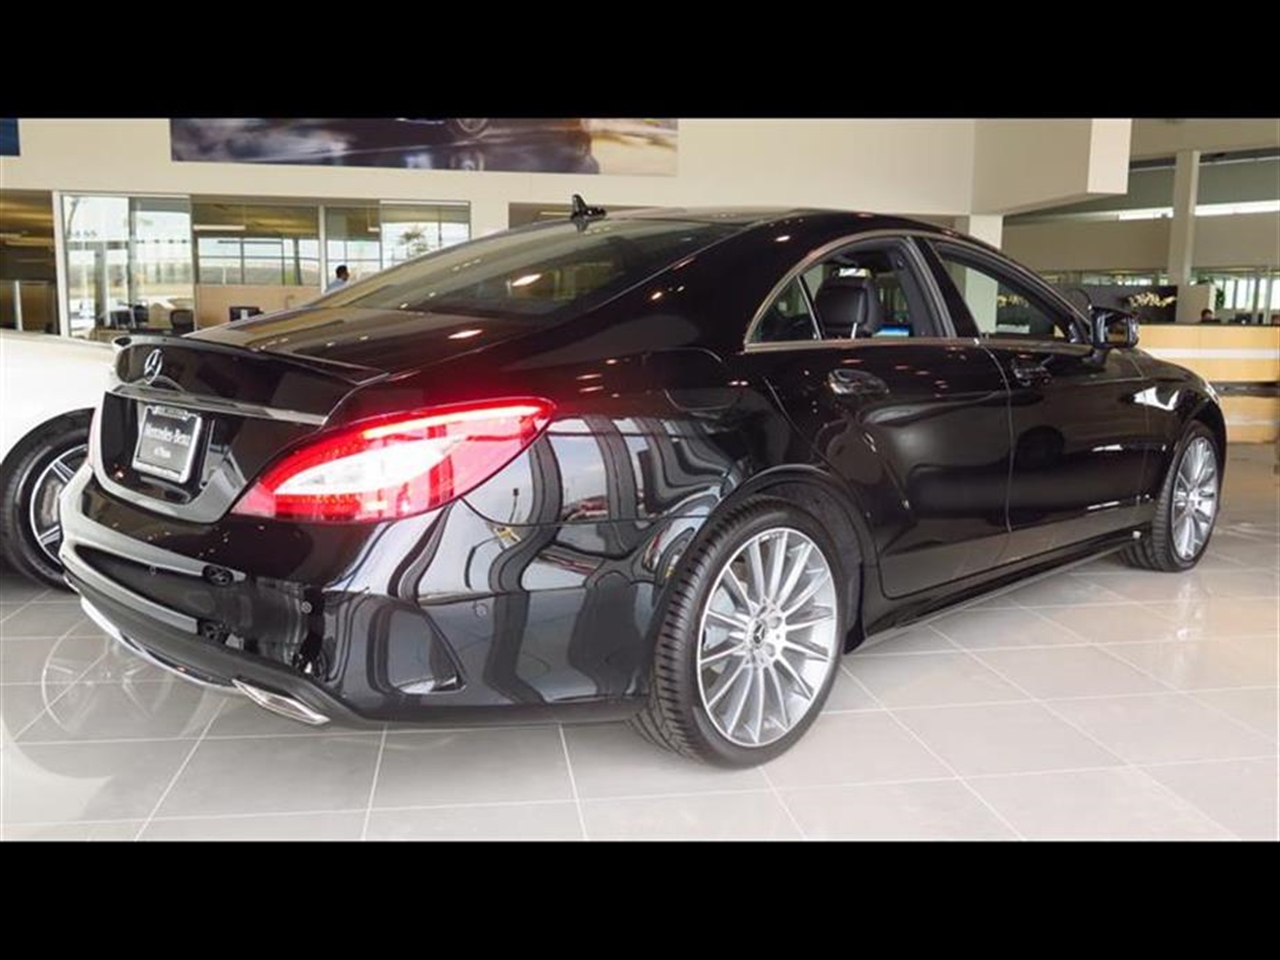 Is there a Mercedes-Benz dealer located near Plano, Texas?